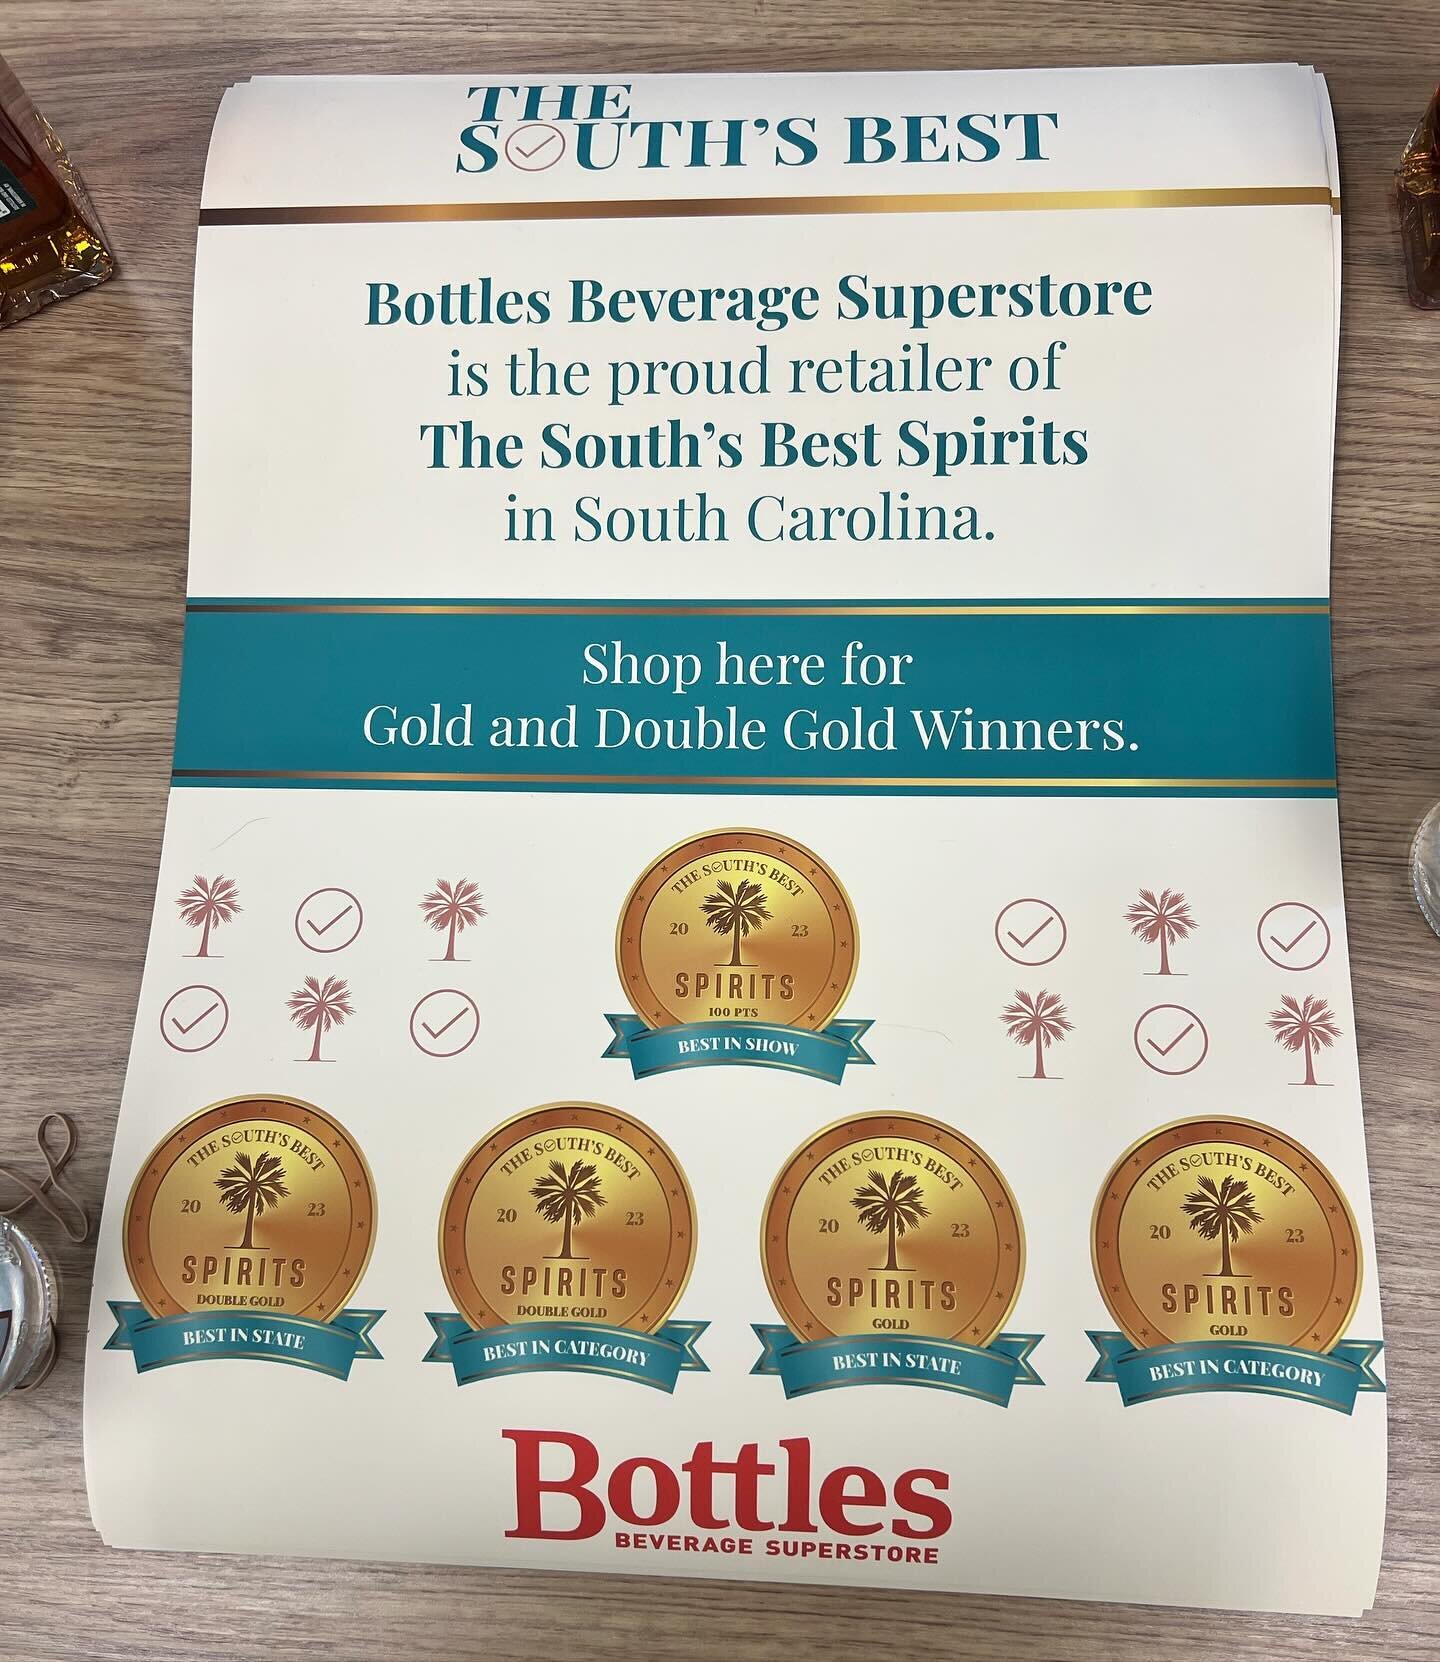 🎉 Spotlight on Bottles, Our Exclusive Retail Partner in South Carolina! 🎉

🏆Winning brands at America&rsquo;s Best Spirits Awards get a unique chance to be featured at exclusive retail partners across the country. In South Carolina that&rsquo;s @s